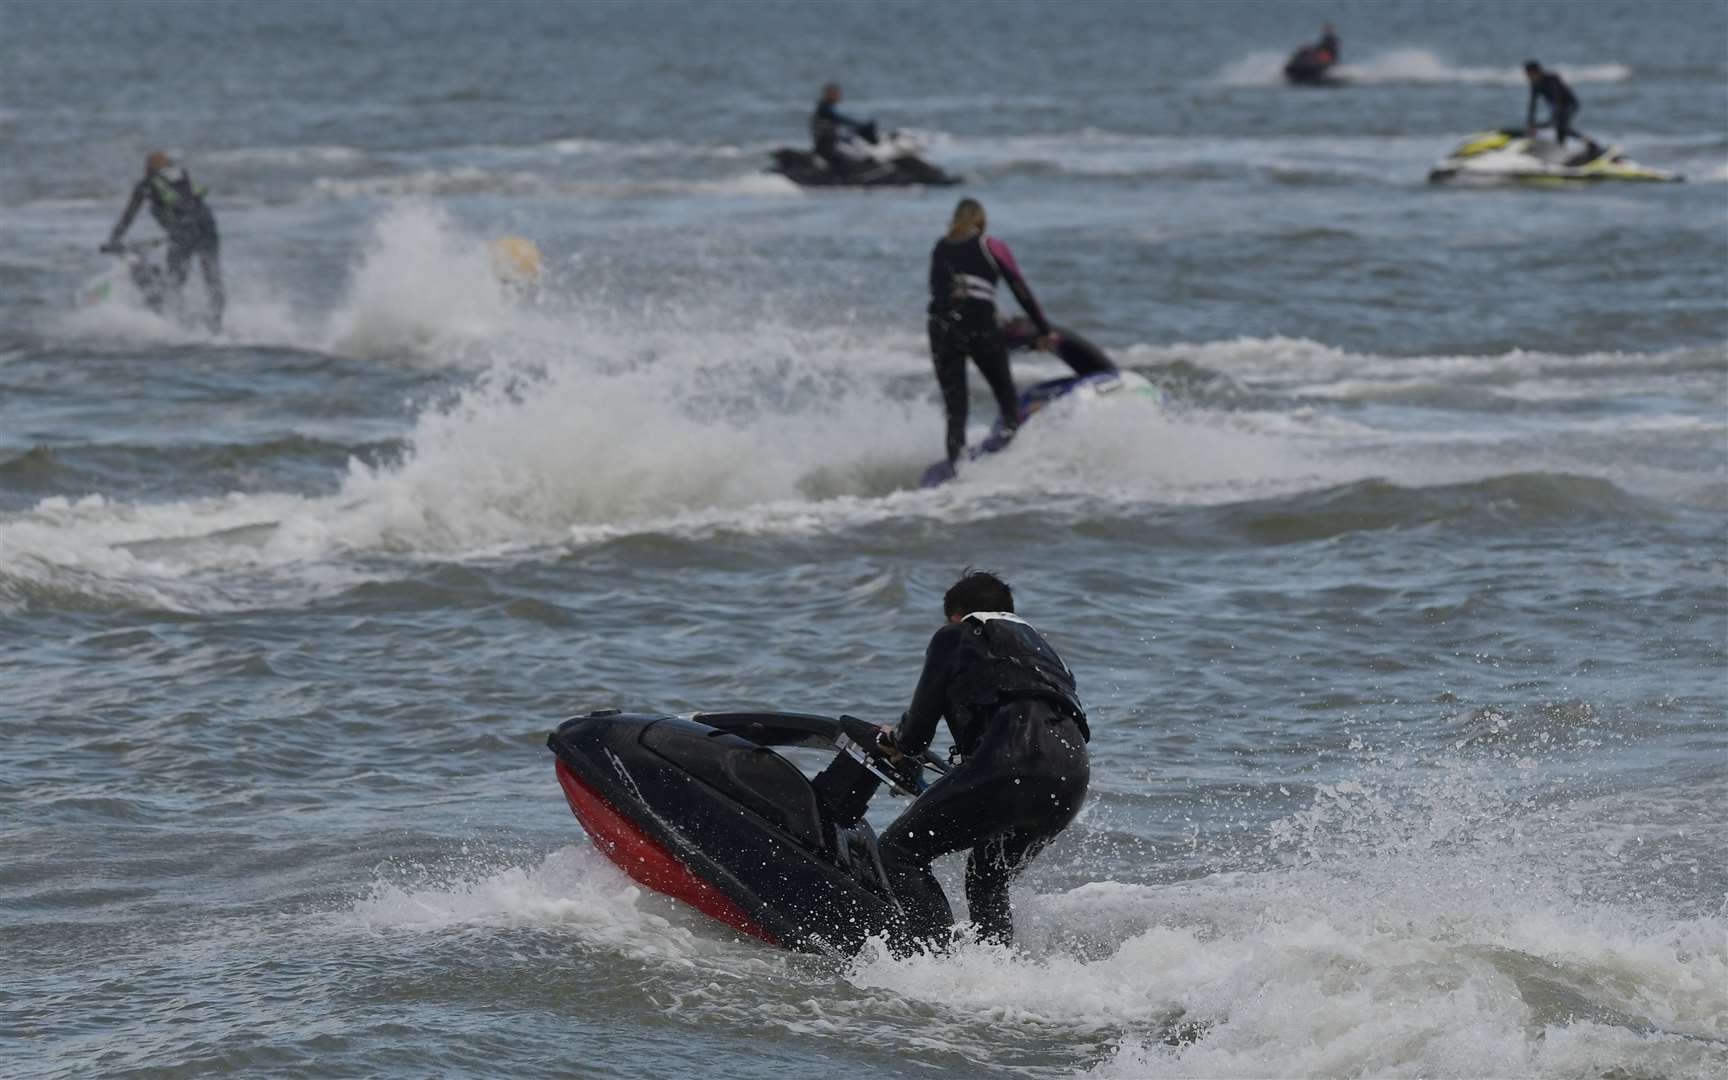 A council has been urged to introduce temporary number plates for jet skis